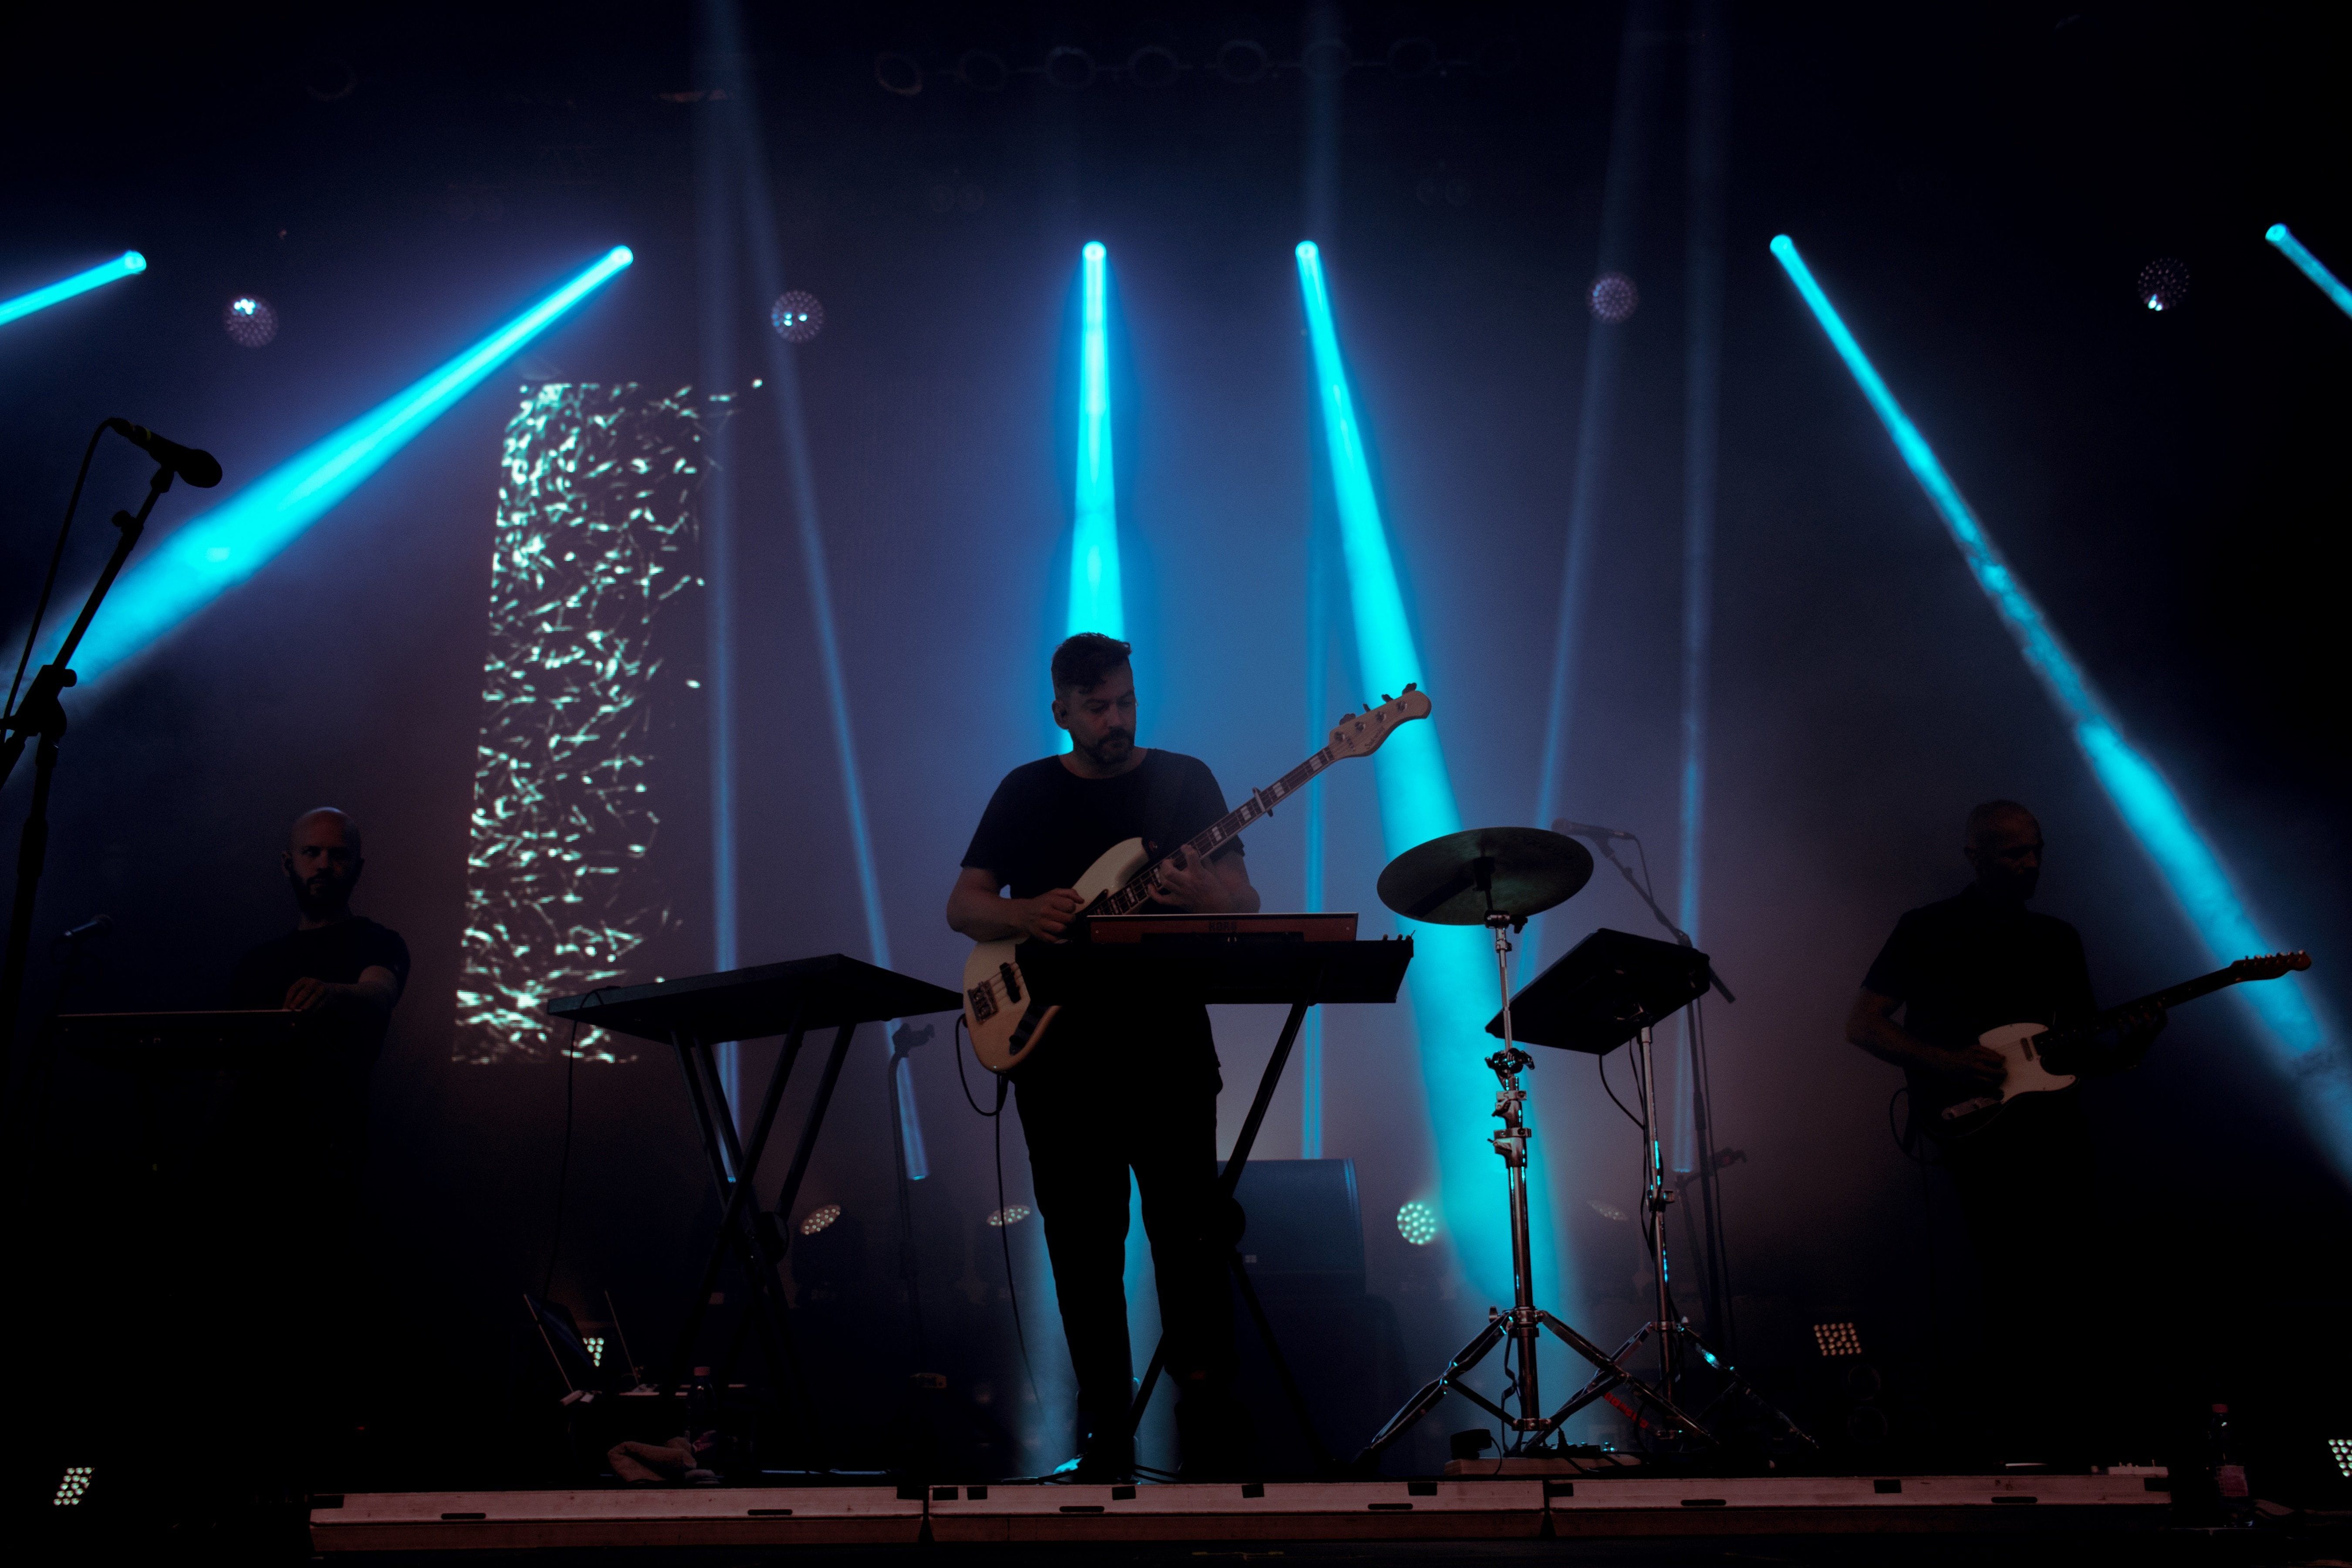 Bonobo’s ‘Migration’ Tour Is an Exercise in Range